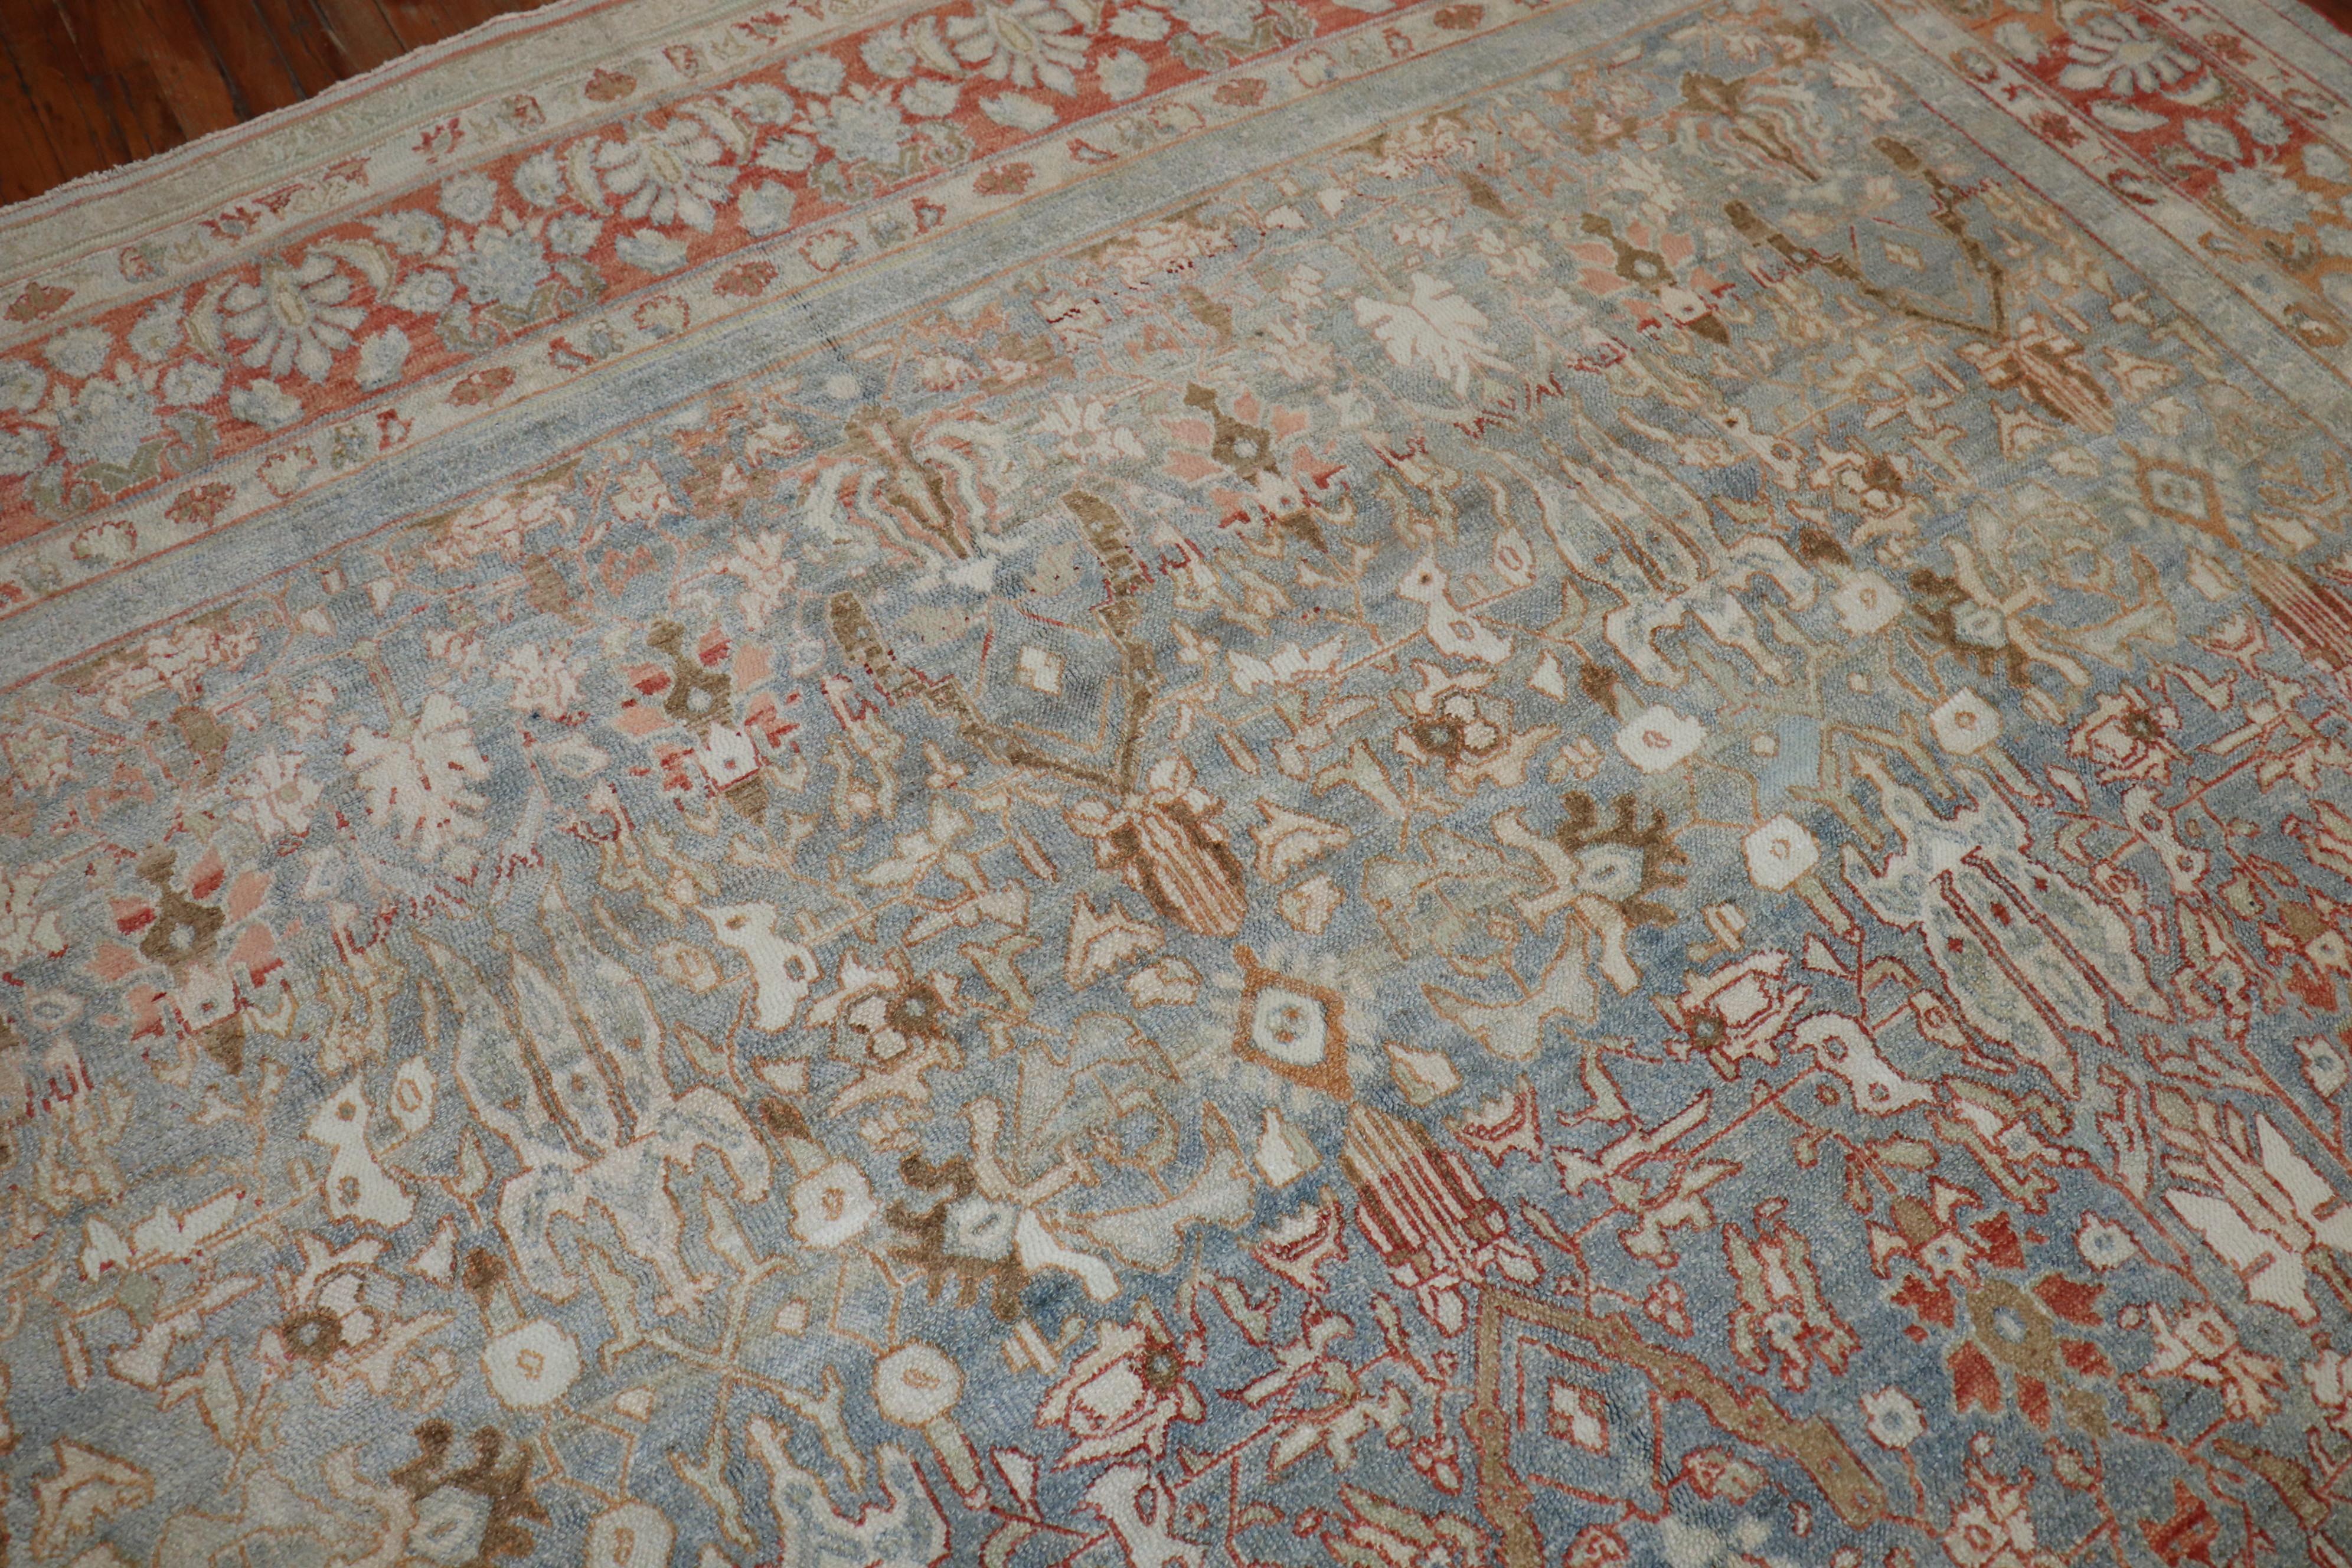 Decorative Oversize Gray Blue Persian Bibikabad Rug, Early 20th Century For Sale 1